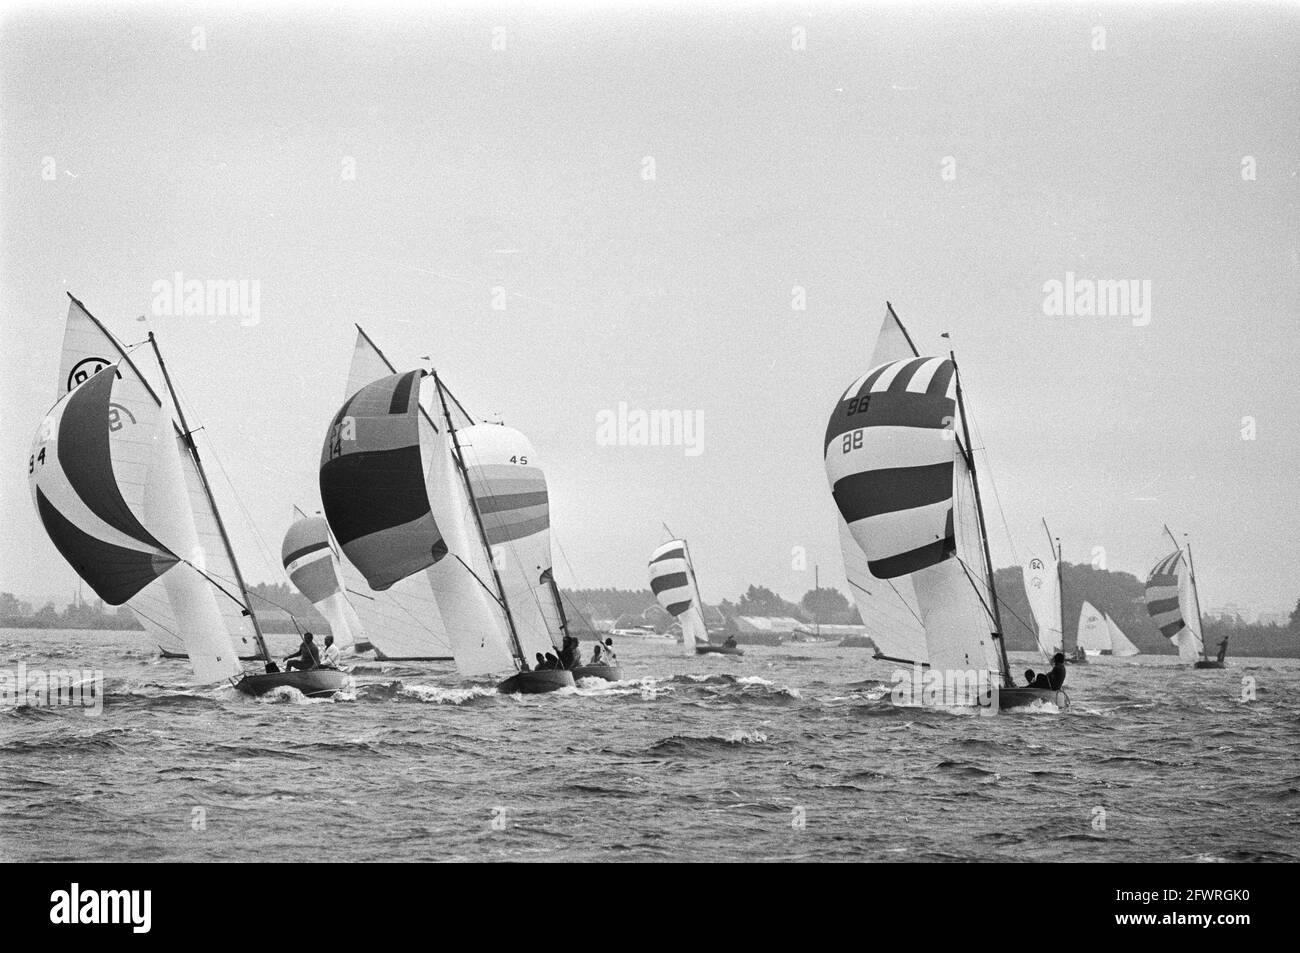 Dutch Sailing Championship, Rainbow Class on Alkmaardermeer, overview, July 10, 1976, CHAMPIONSHIPS, SAGES, The Netherlands, 20th century press agency photo, news to remember, documentary, historic photography 1945-1990, visual stories, human history of the Twentieth Century, capturing moments in time Stock Photo